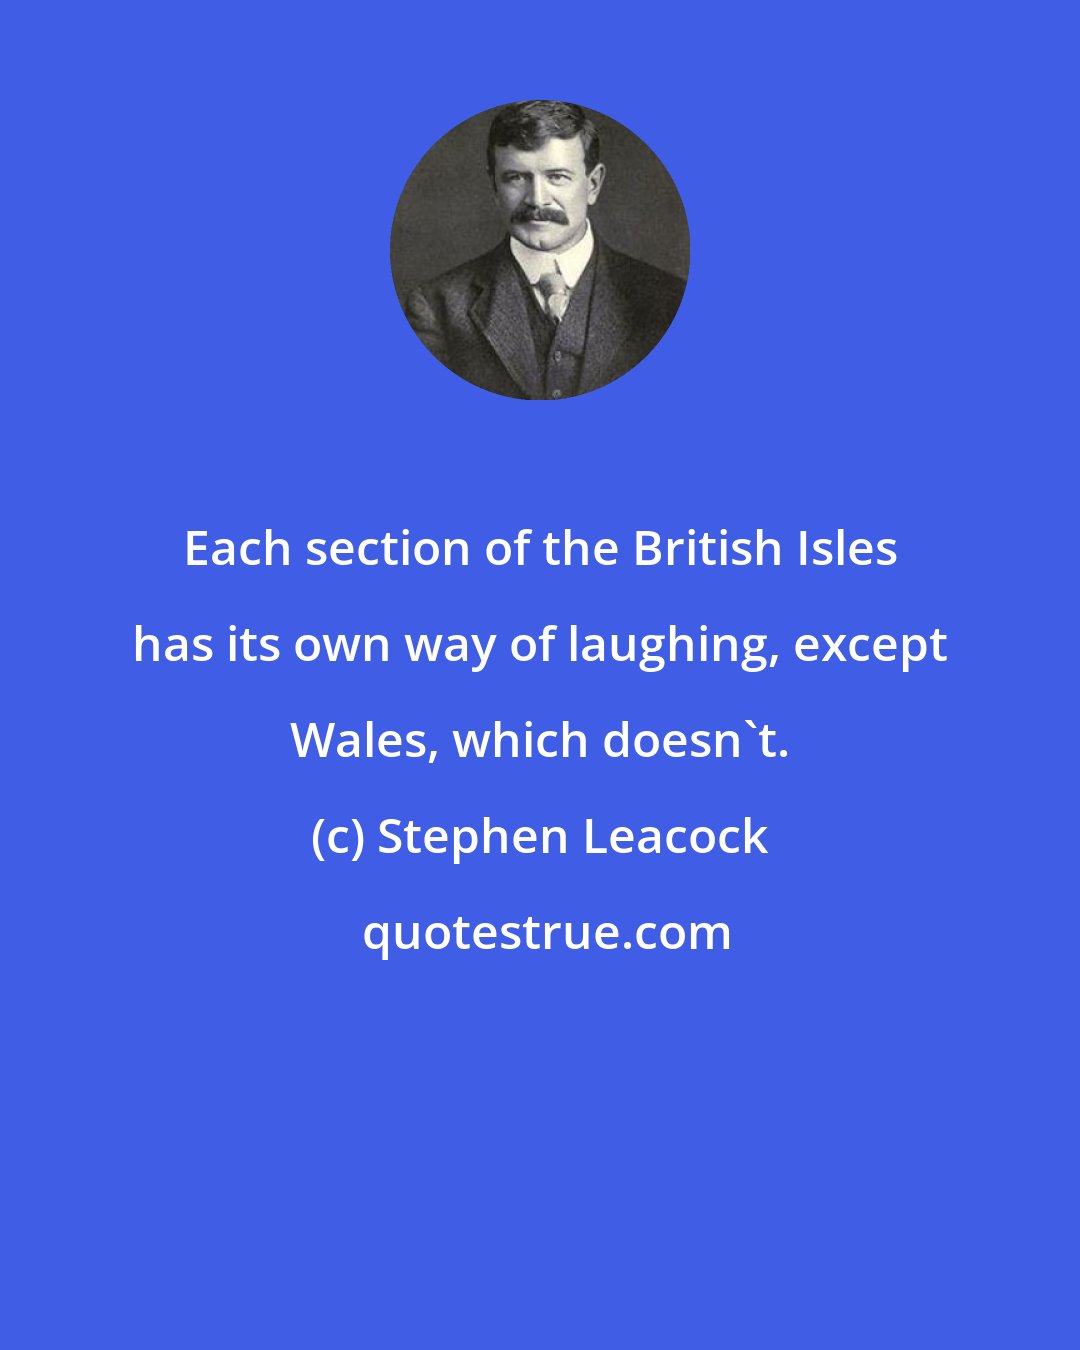 Stephen Leacock: Each section of the British Isles has its own way of laughing, except Wales, which doesn't.